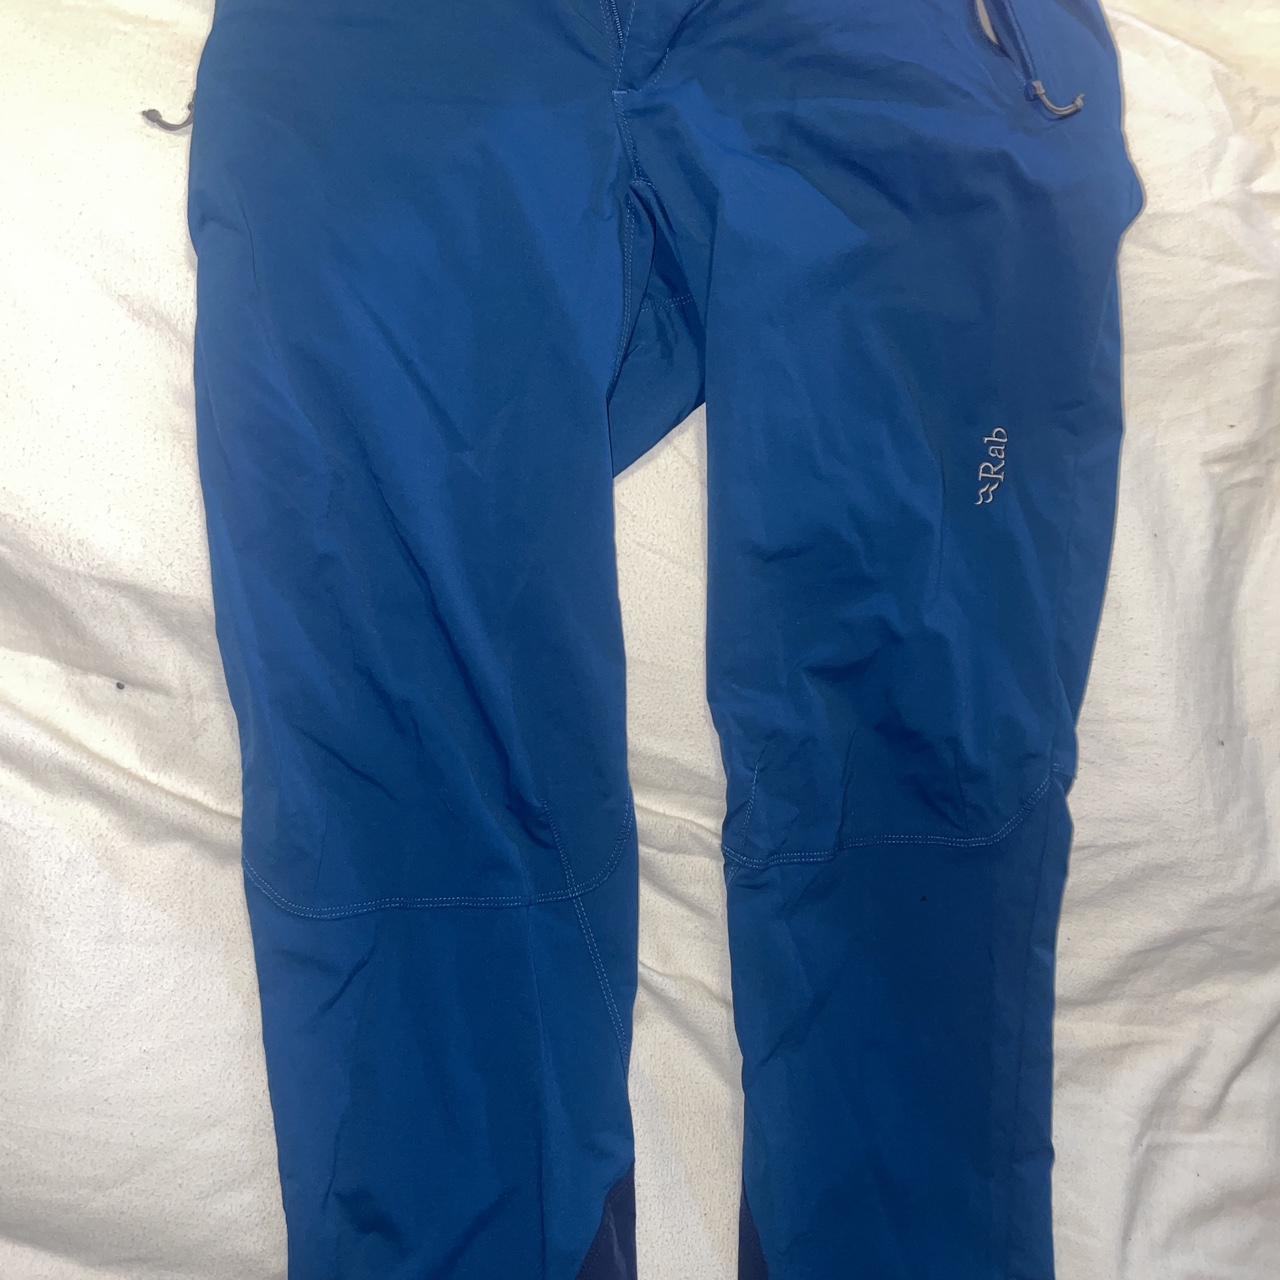 Blue Rab walking pants 9/10 Condition perfect for... - Depop